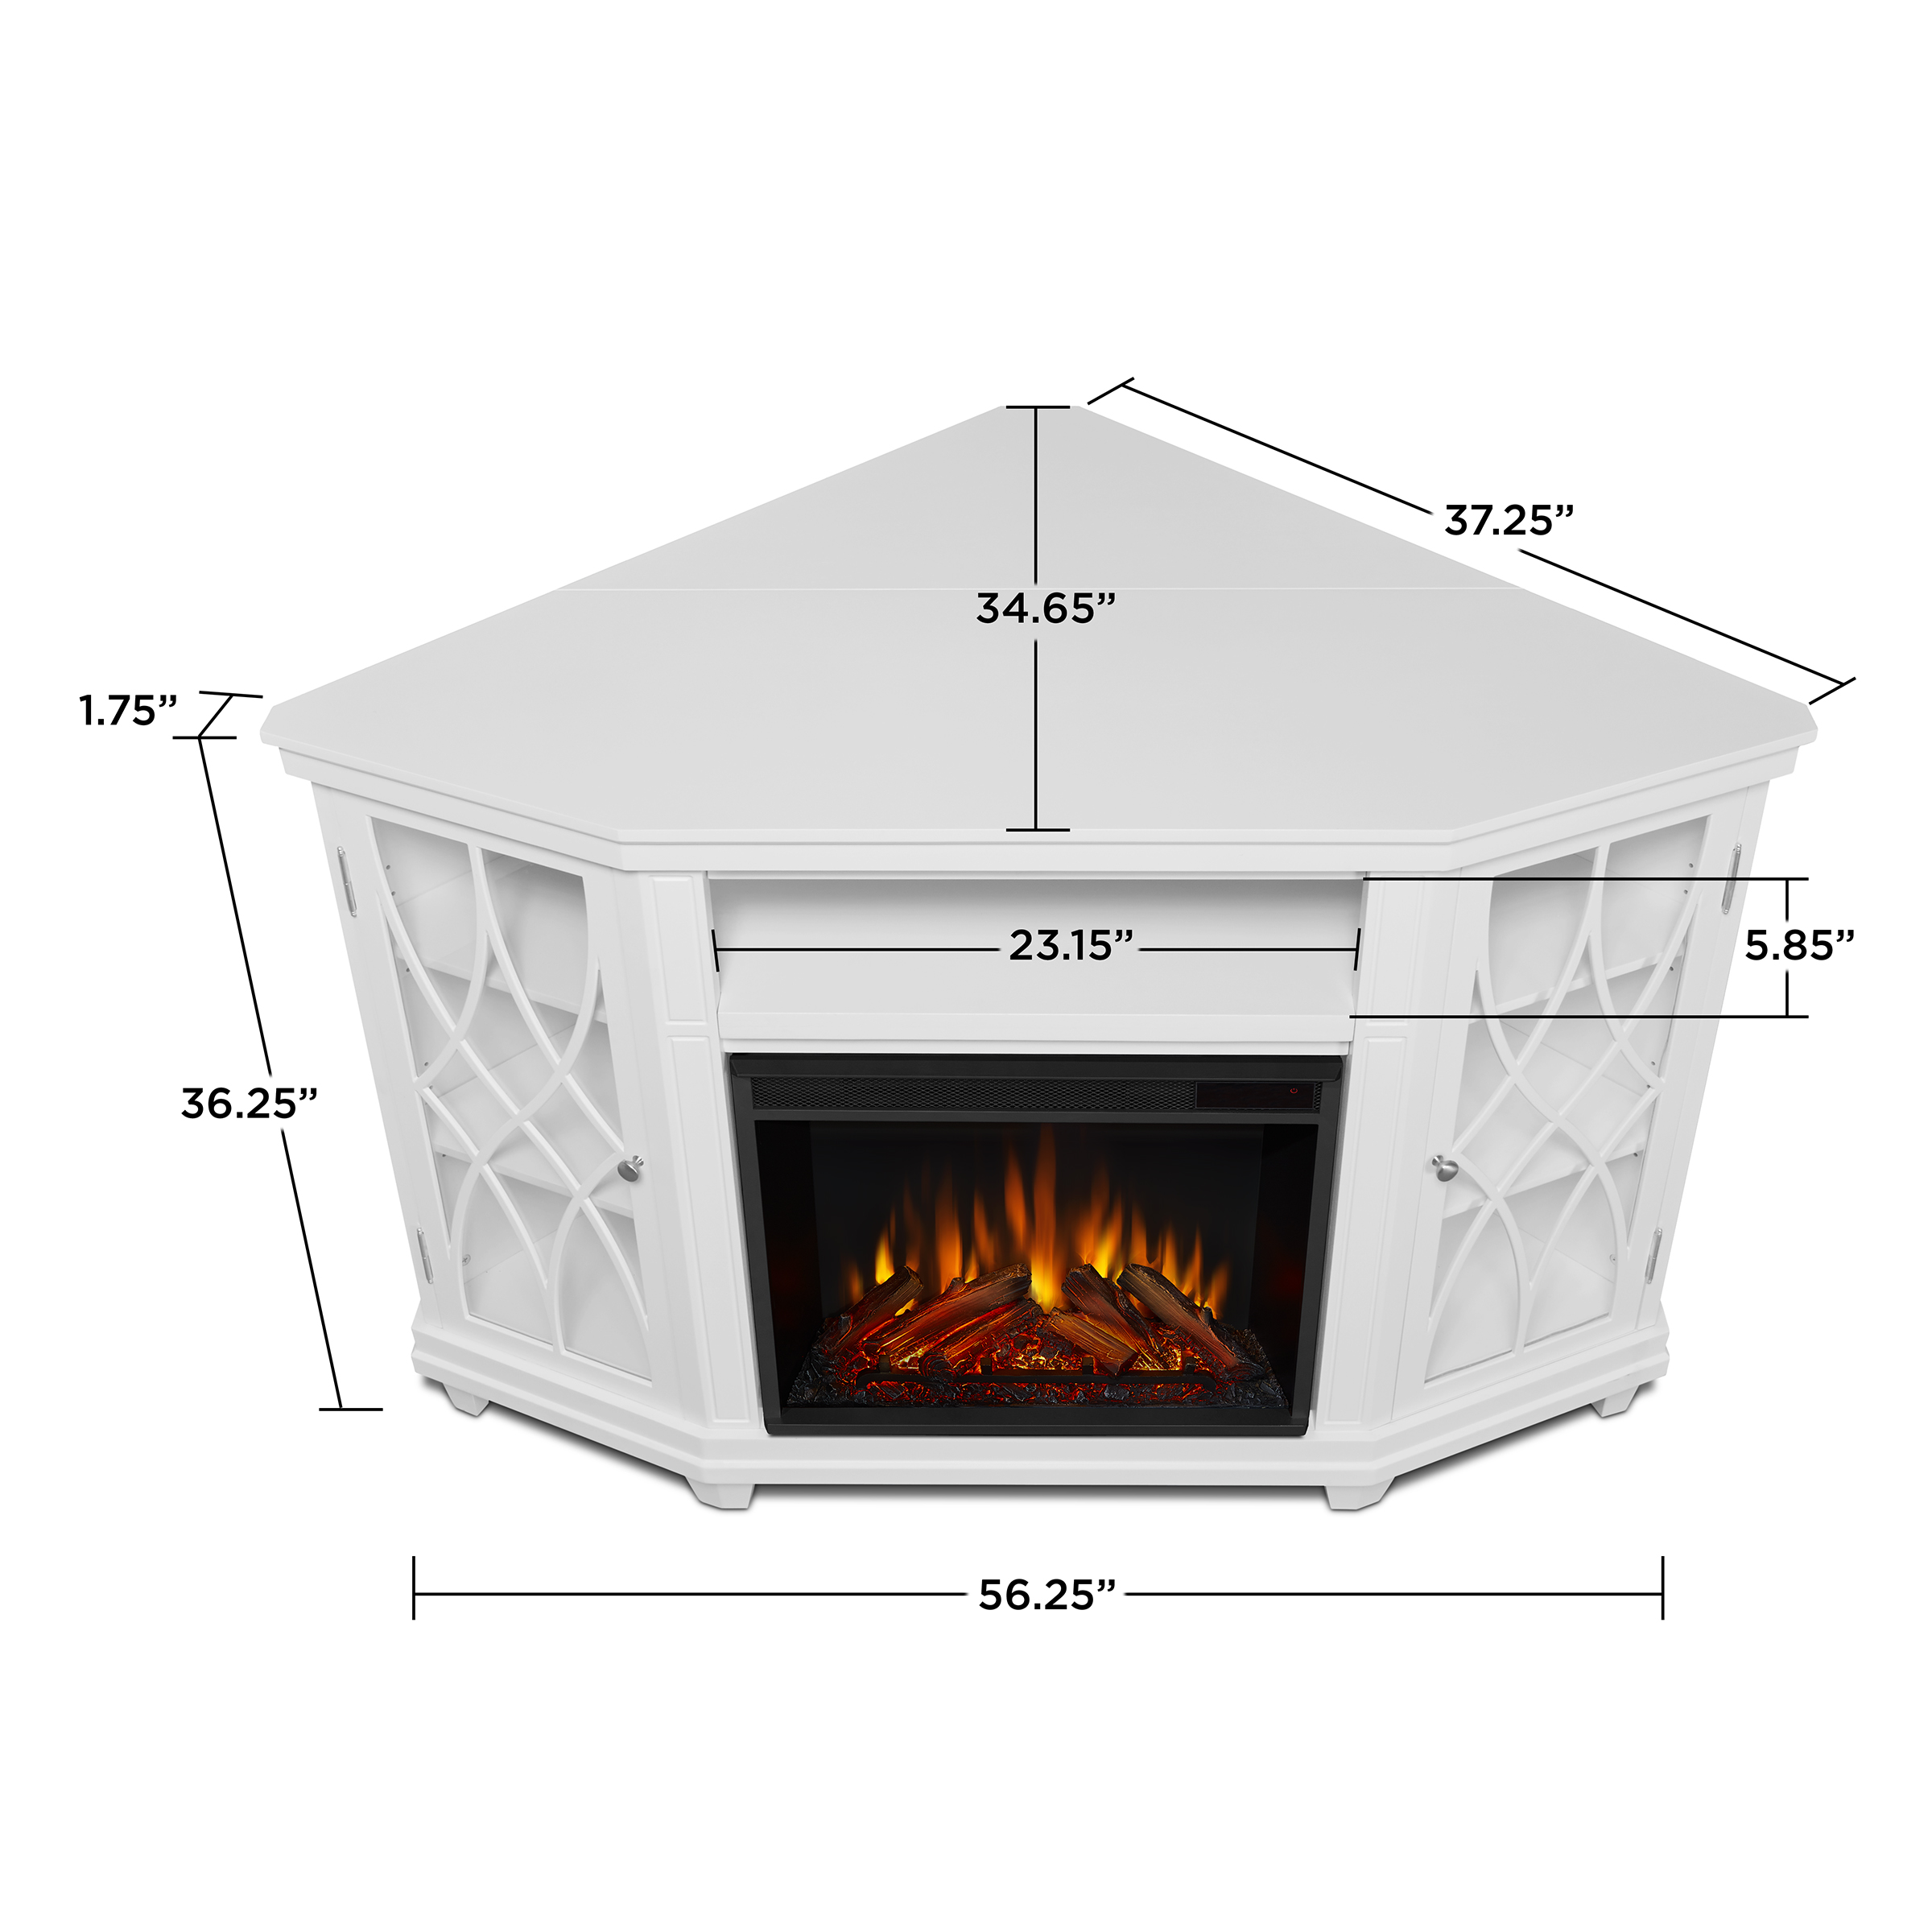 White Electric Fireplace Dimensions